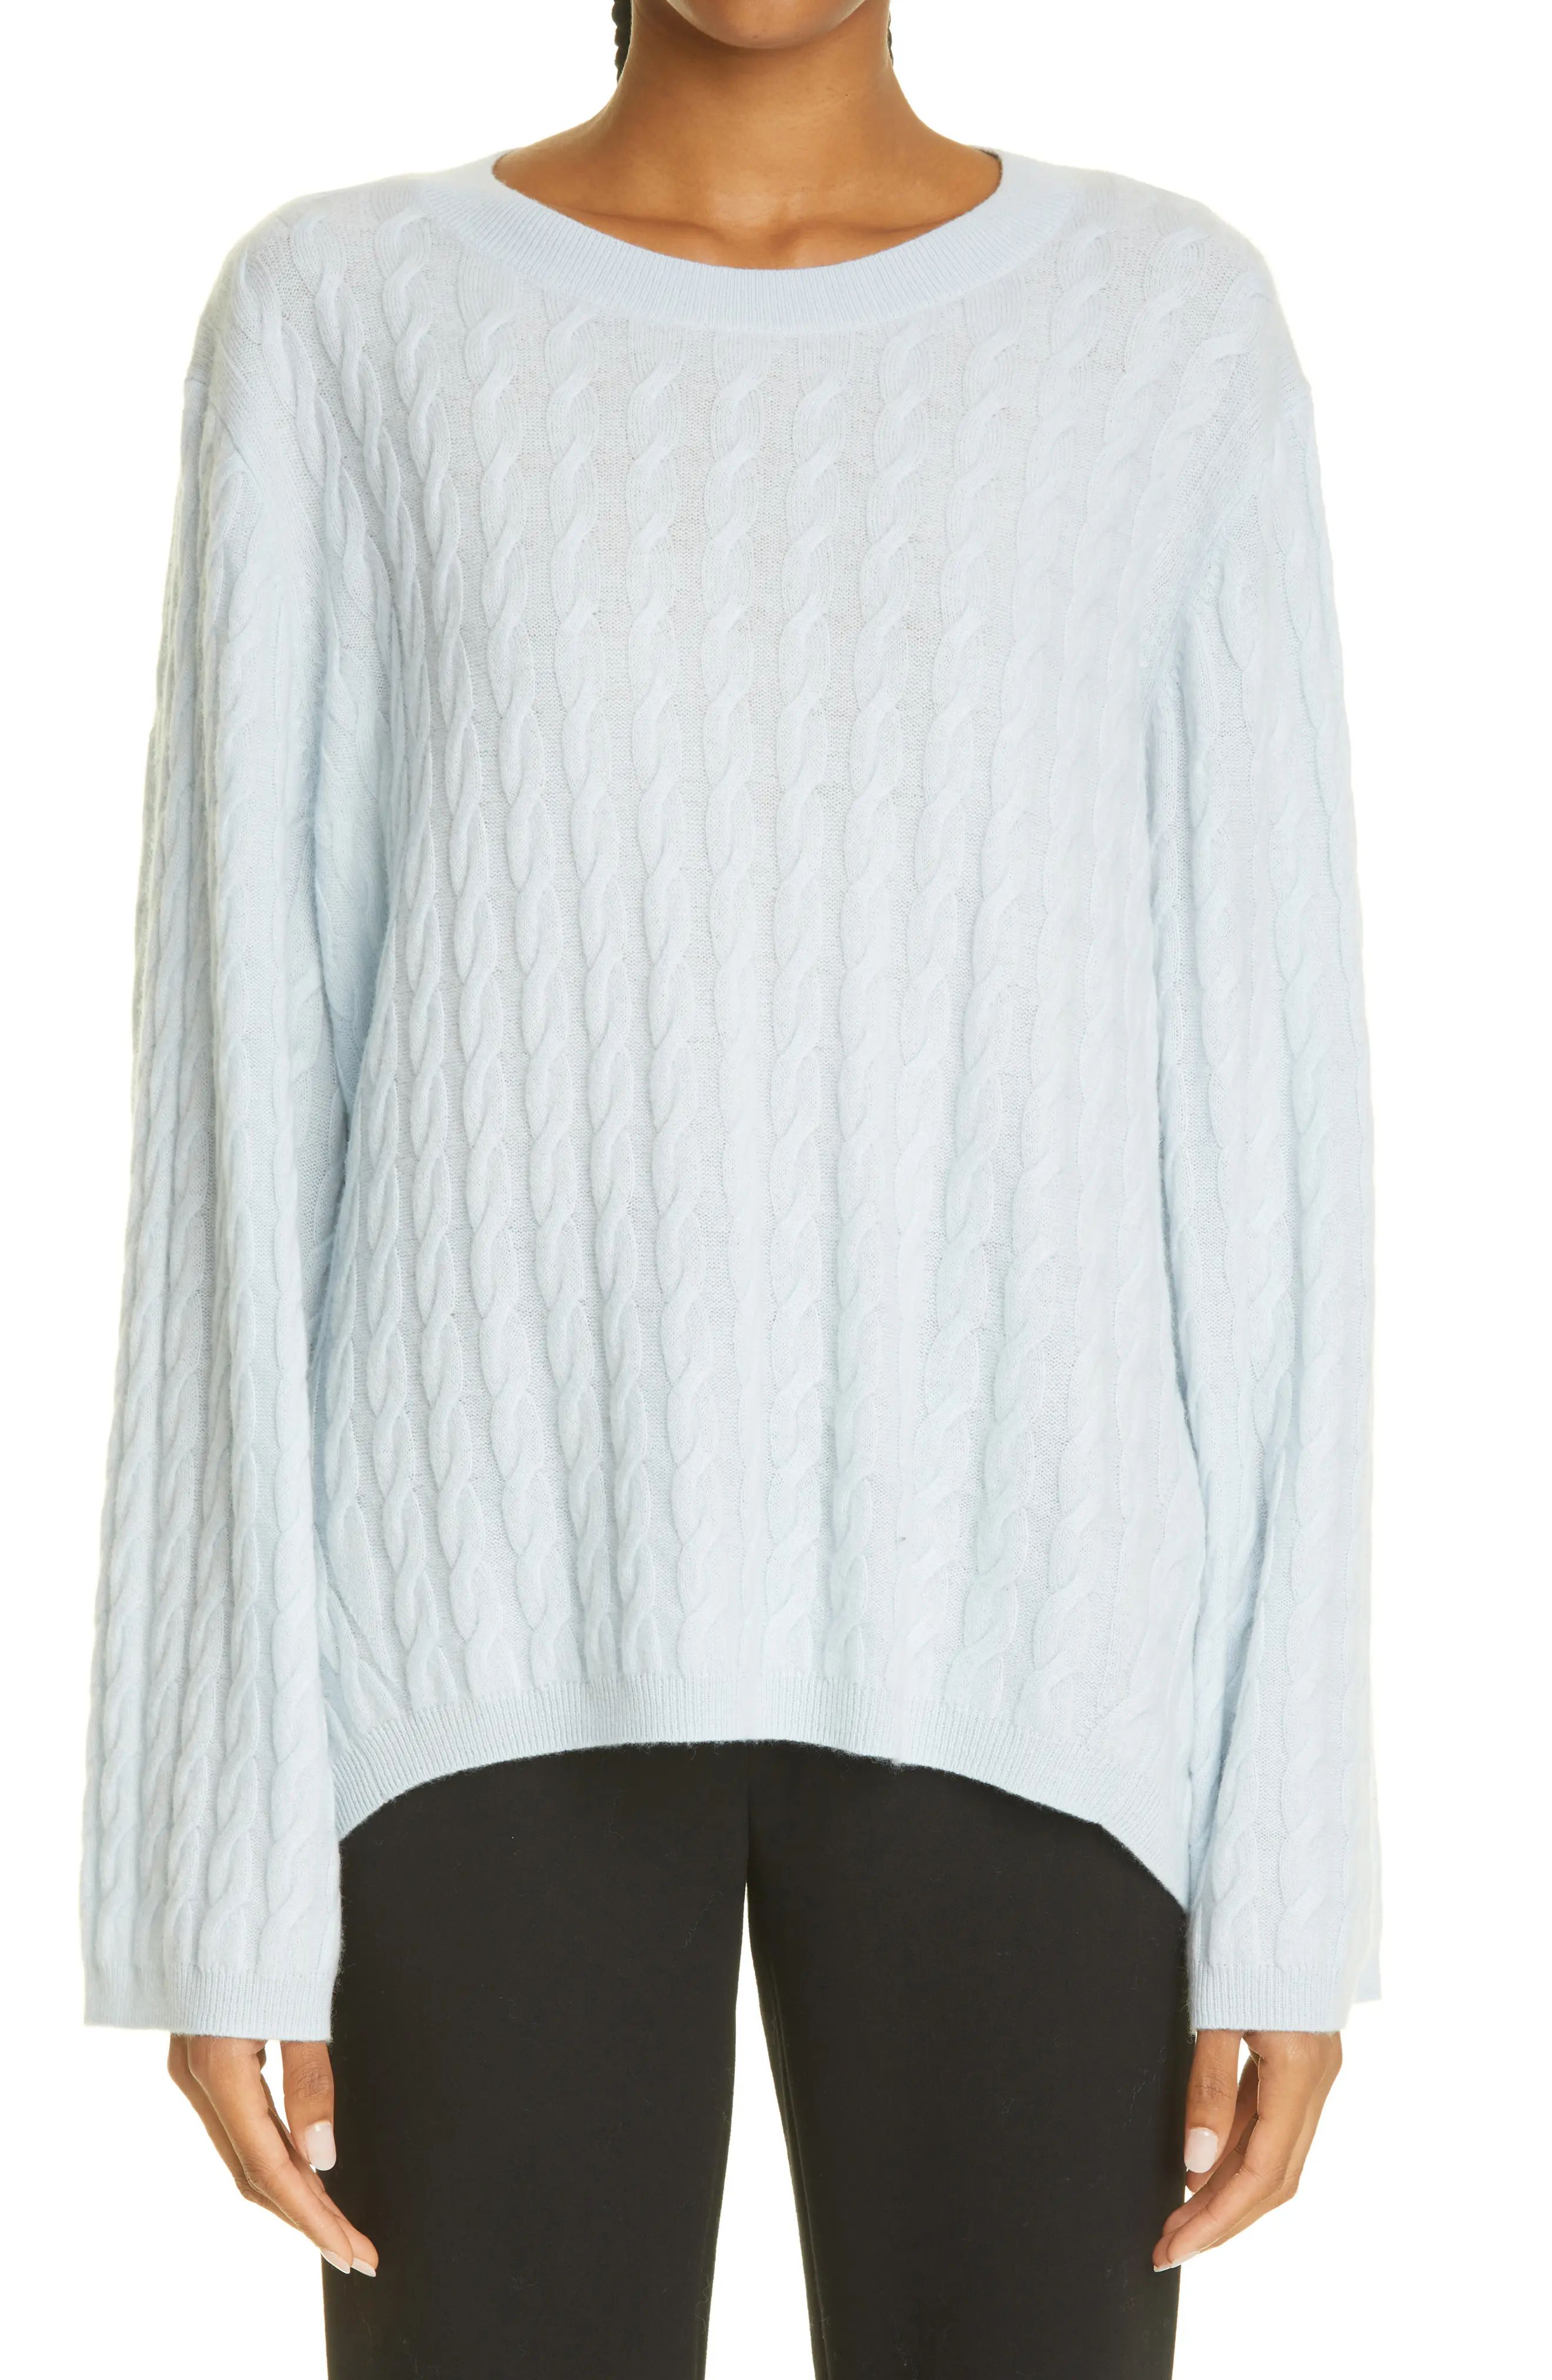 Toteme Women's Cable Stitch Cashmere Sweater in Banker Blue at Nordstrom, Size X-Small | Nordstrom